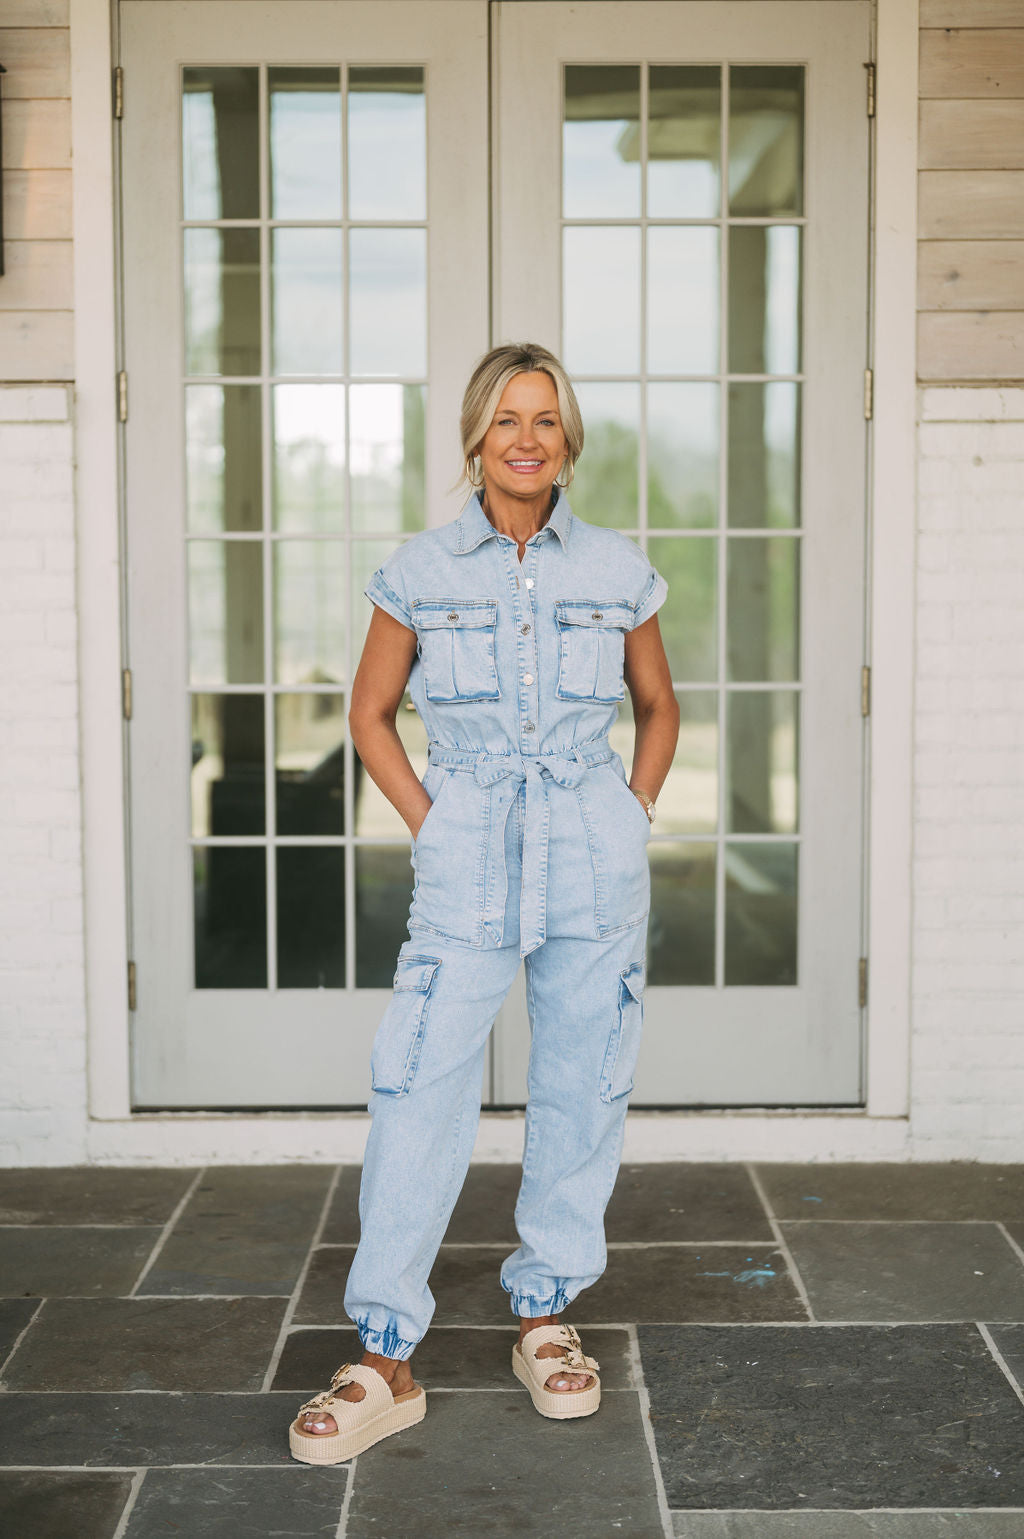 The Easygoing Jumpsuit - Dusty Olive - The Trendy Trunk